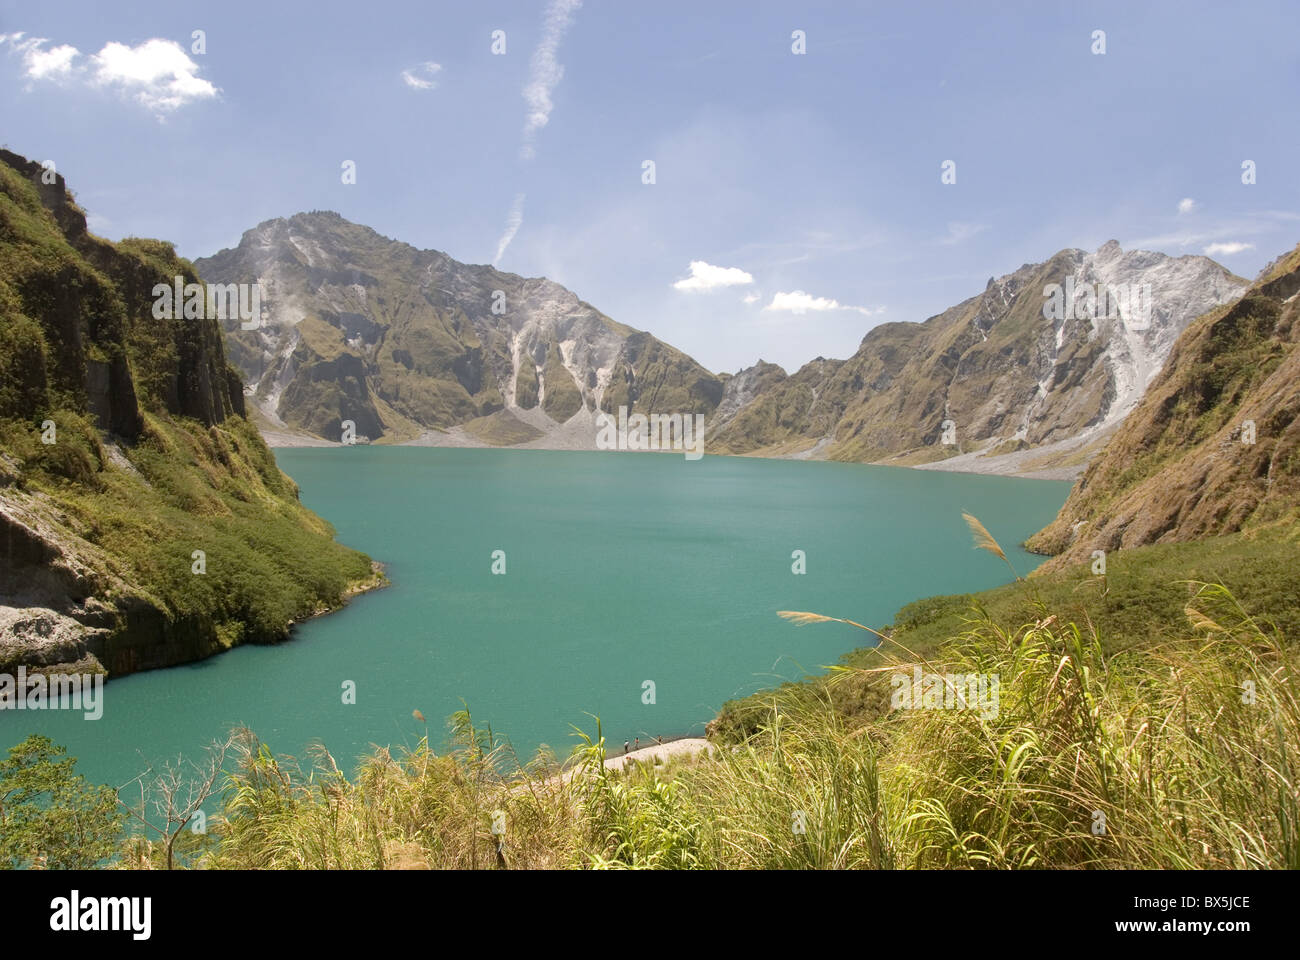 Lake in summit crater formed in 1991 eruption, Pinatubo volcano, northern Luzon, Philippines, Southeast Asia, Asia Stock Photo